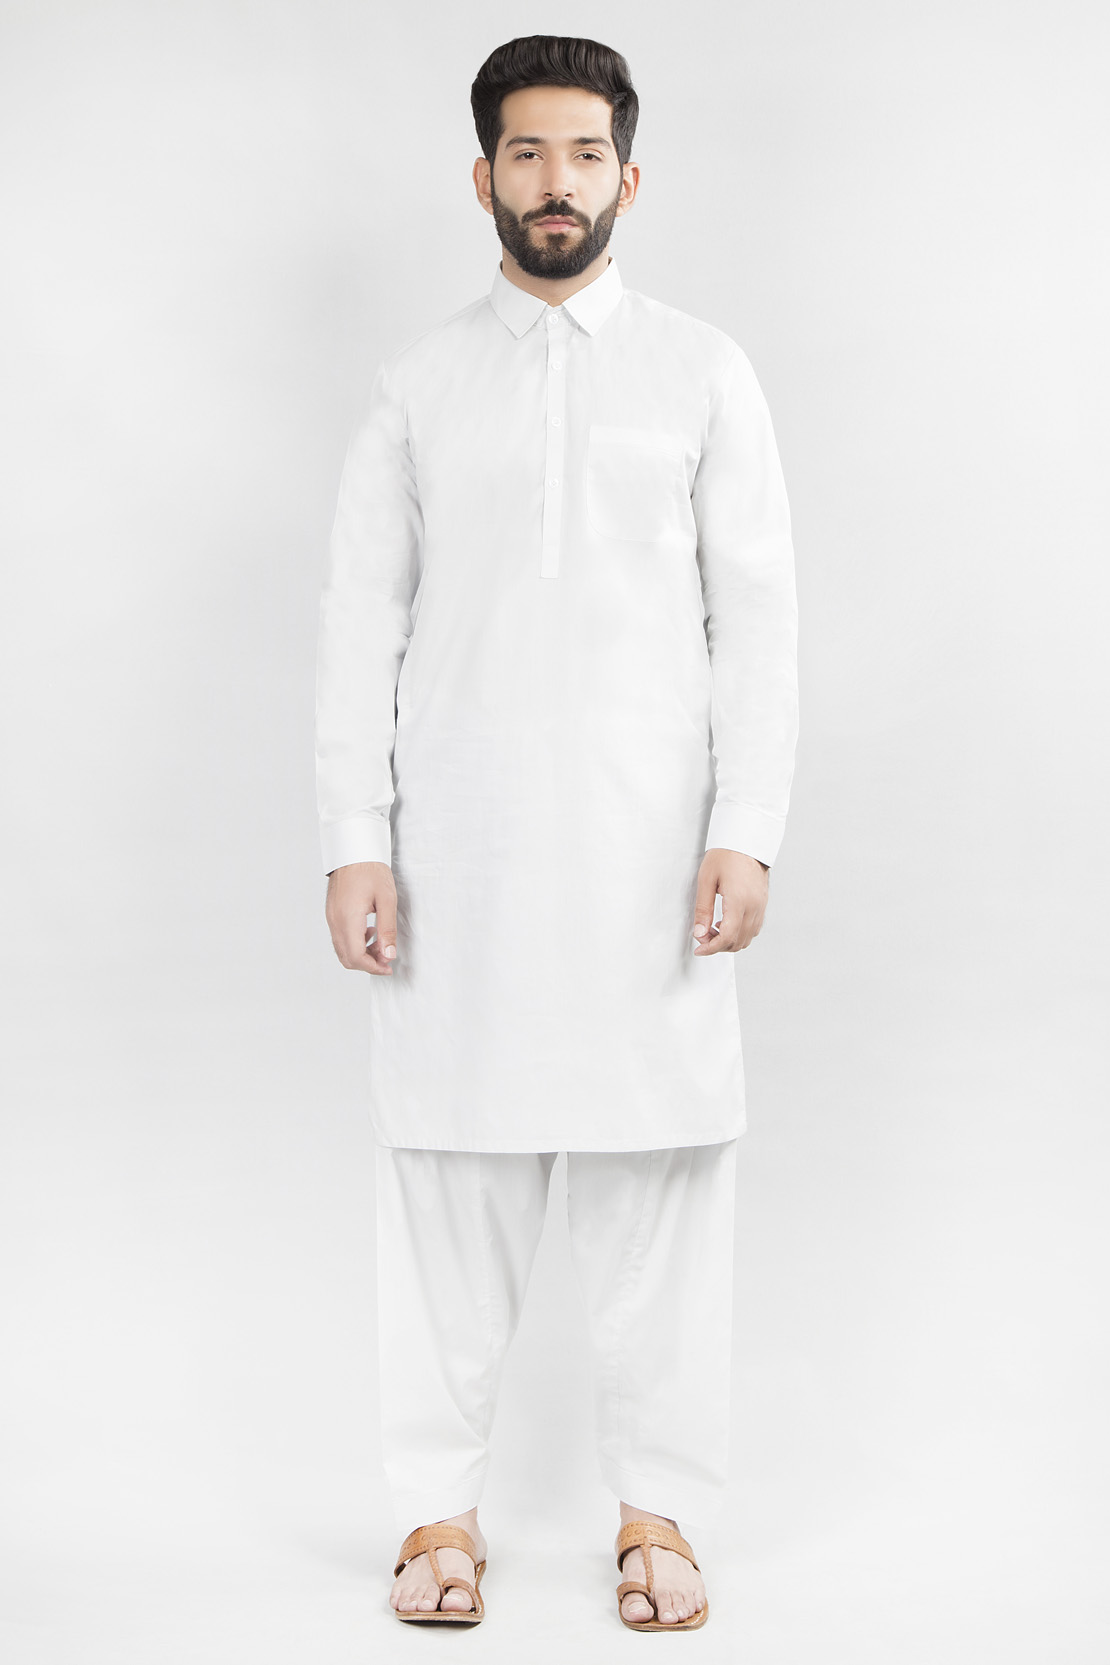 Afsaneh Men's Eid latest Collection